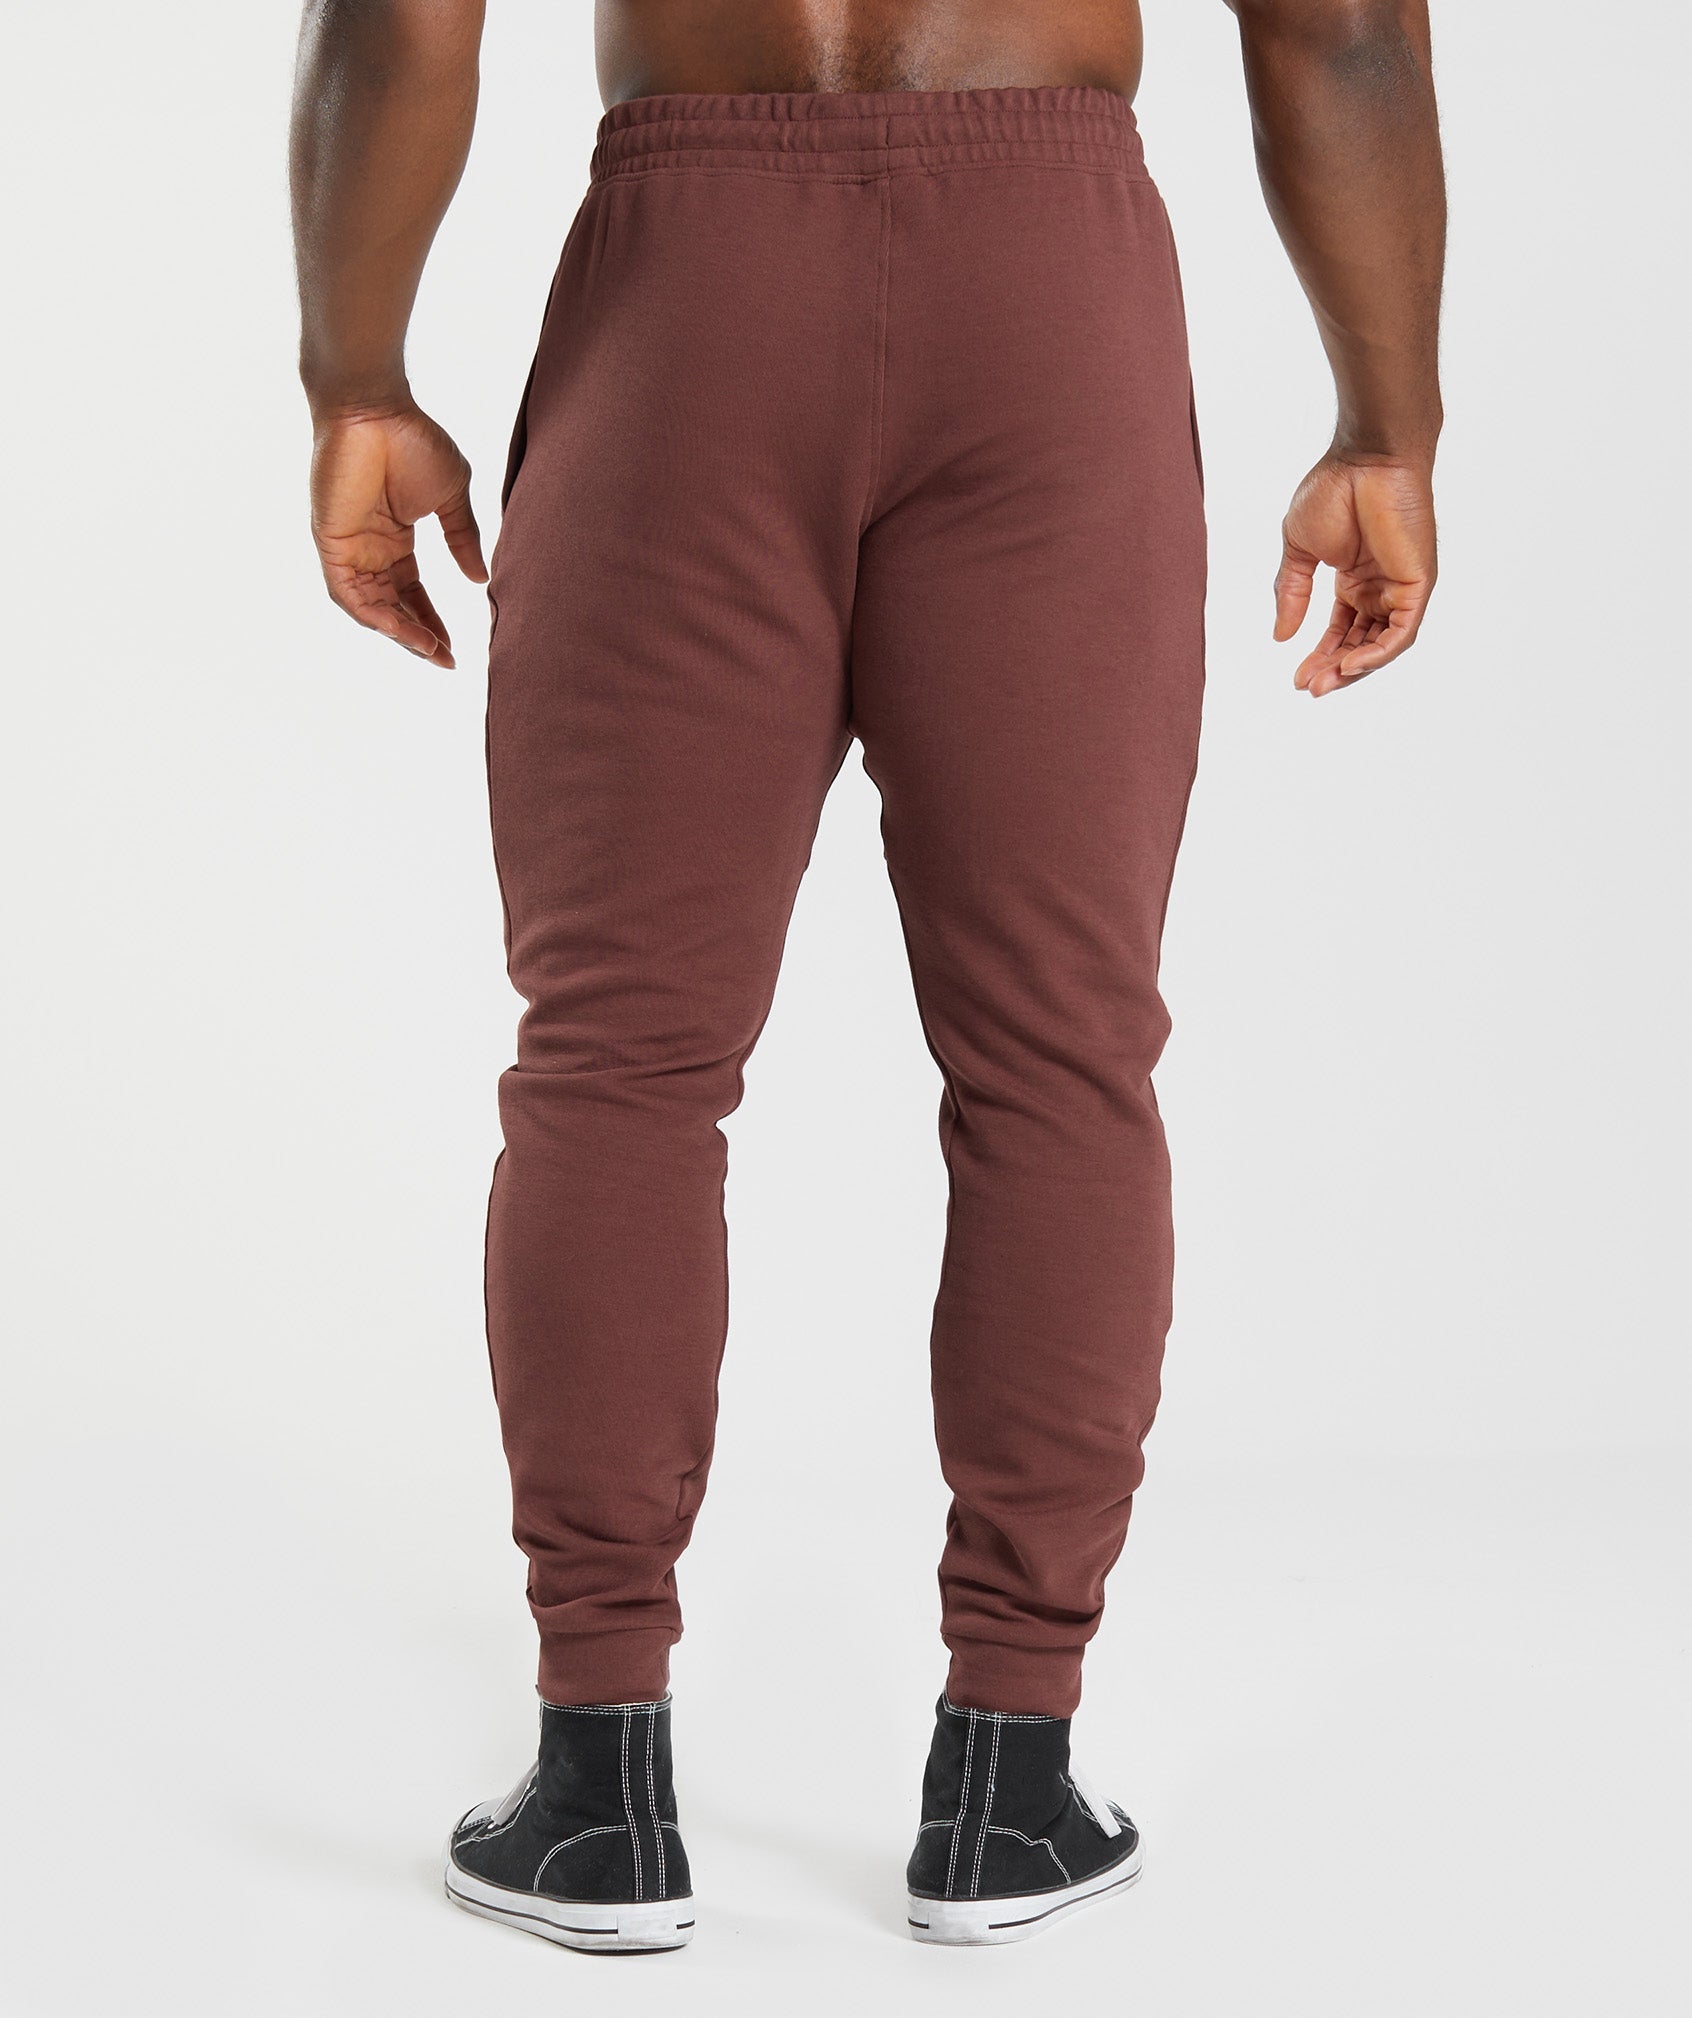 React Joggers in Cherry Brown - view 2